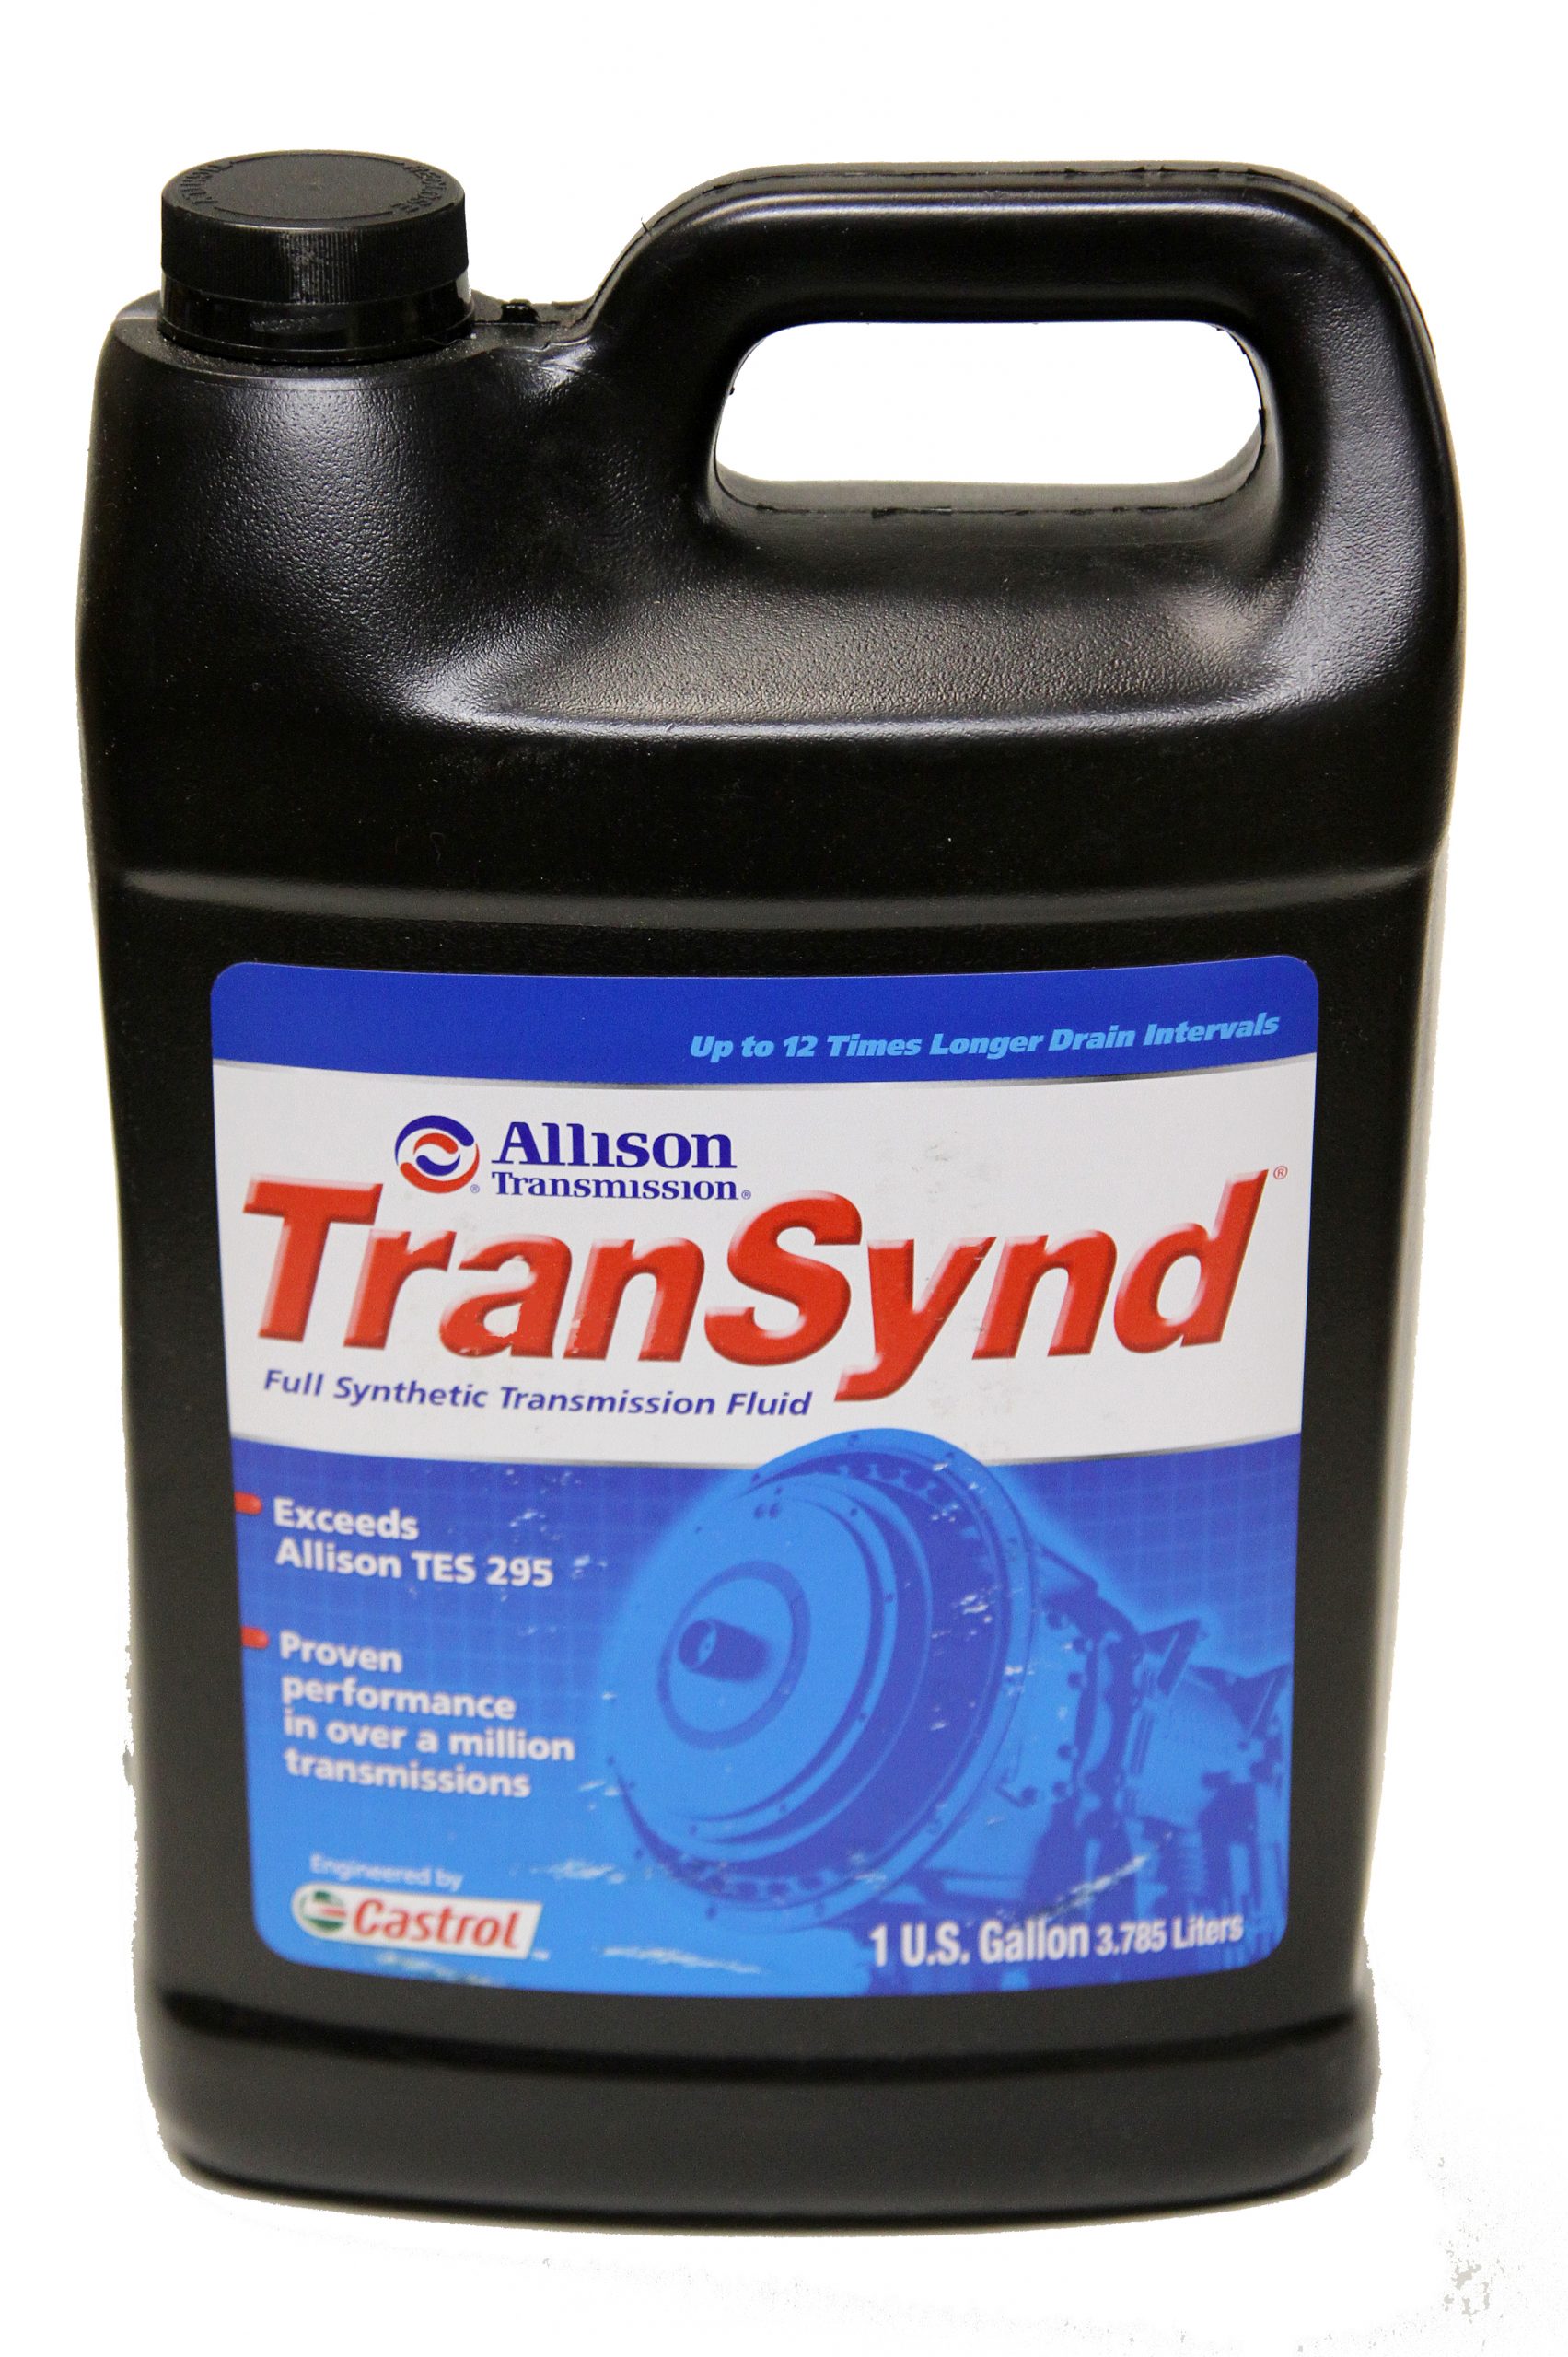 Allison’s TranSynd synthetic transmission fluid